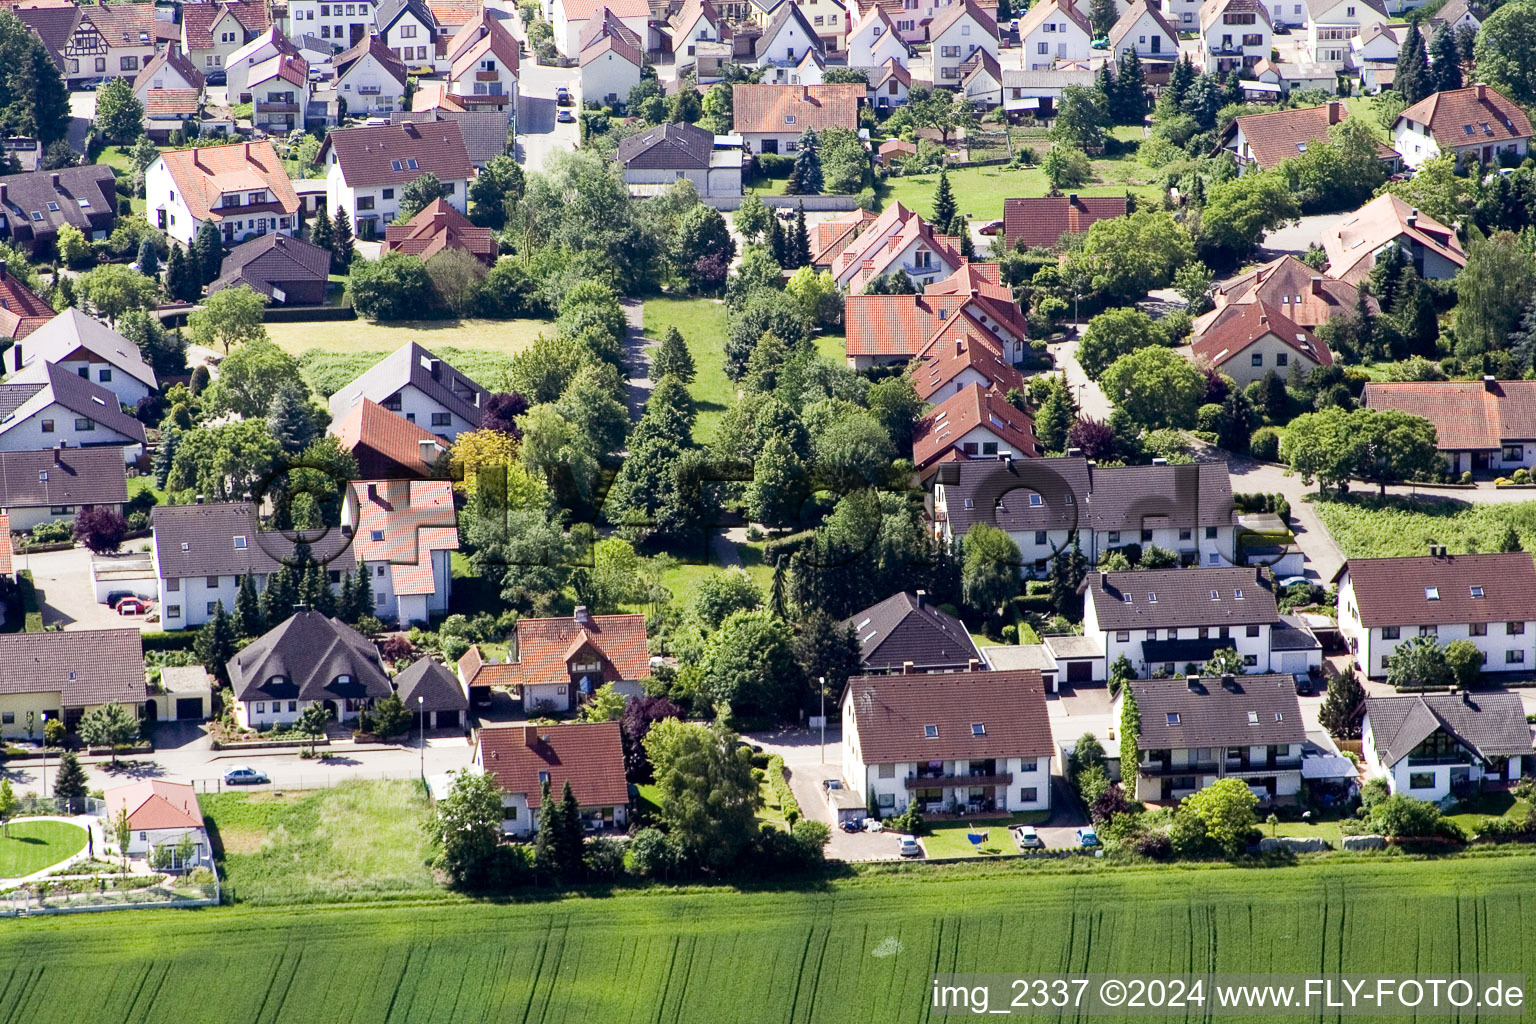 Aerial view of Guttenbergstr in Kandel in the state Rhineland-Palatinate, Germany